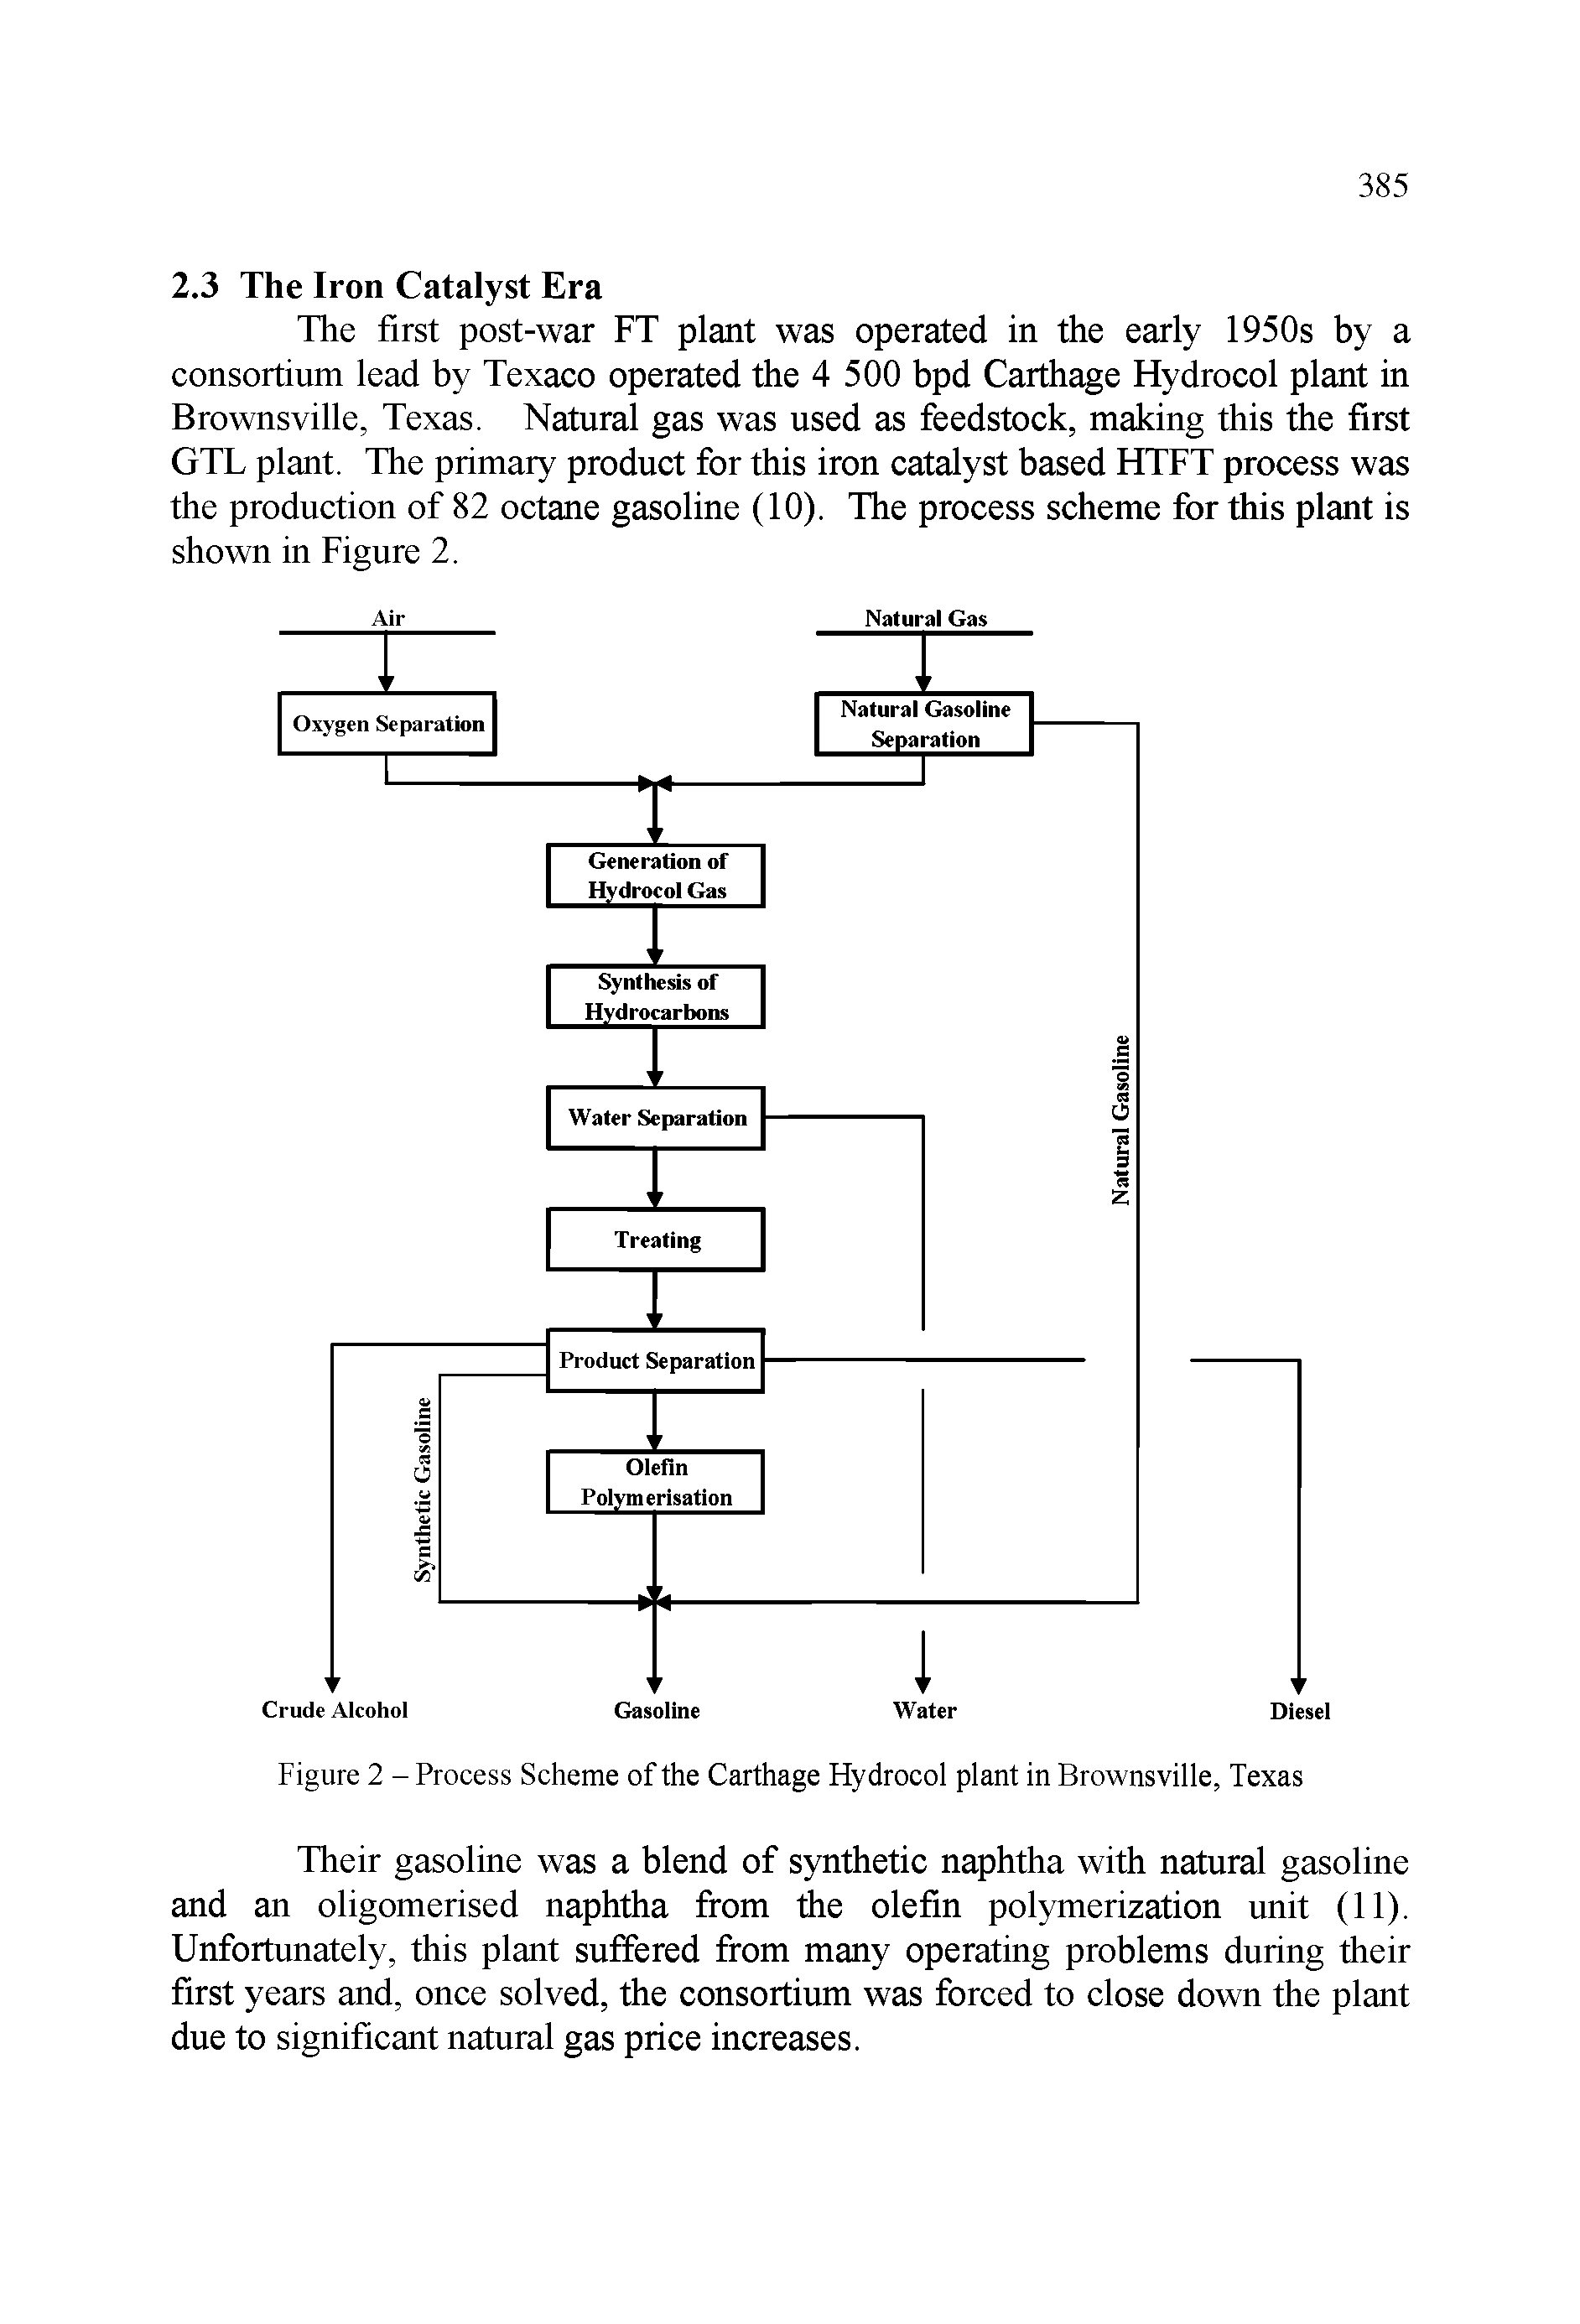 Figure 2 - Process Scheme of the Carthage Hydrocol plant in Brownsville, Texas...